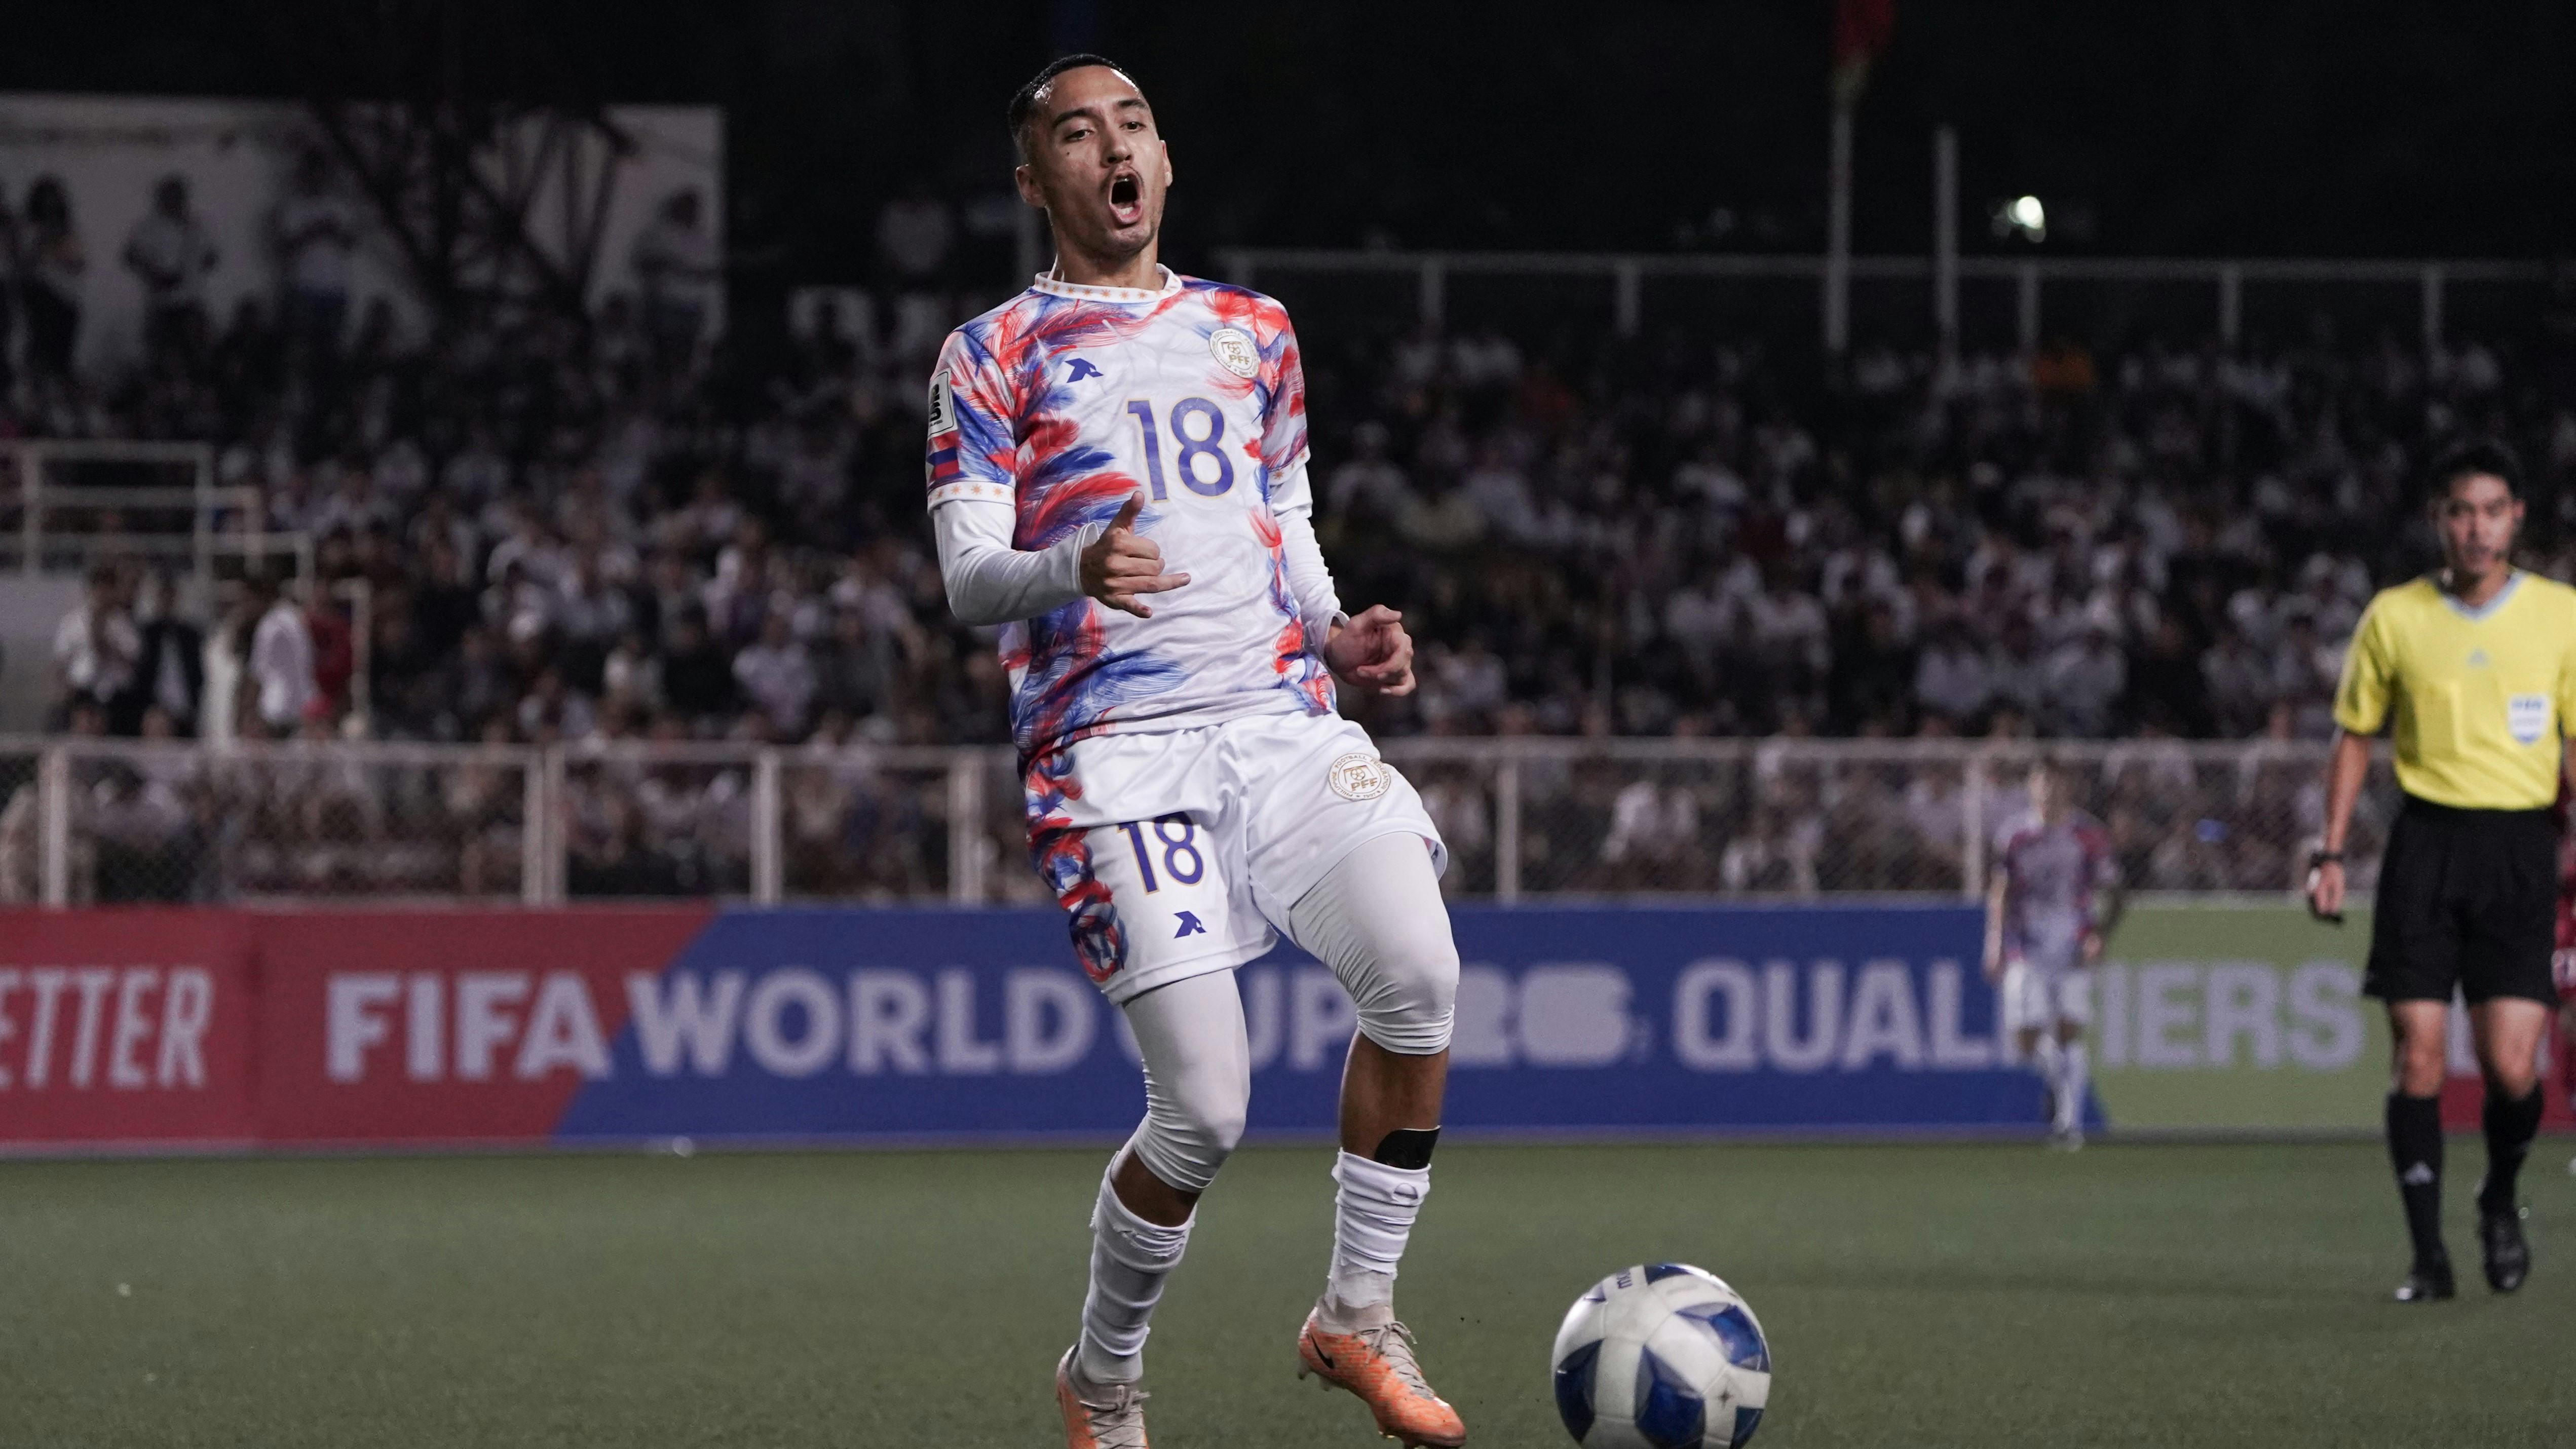 Patrick Reichelt scores early goal but Azkals settle for draw with gritty Indonesia